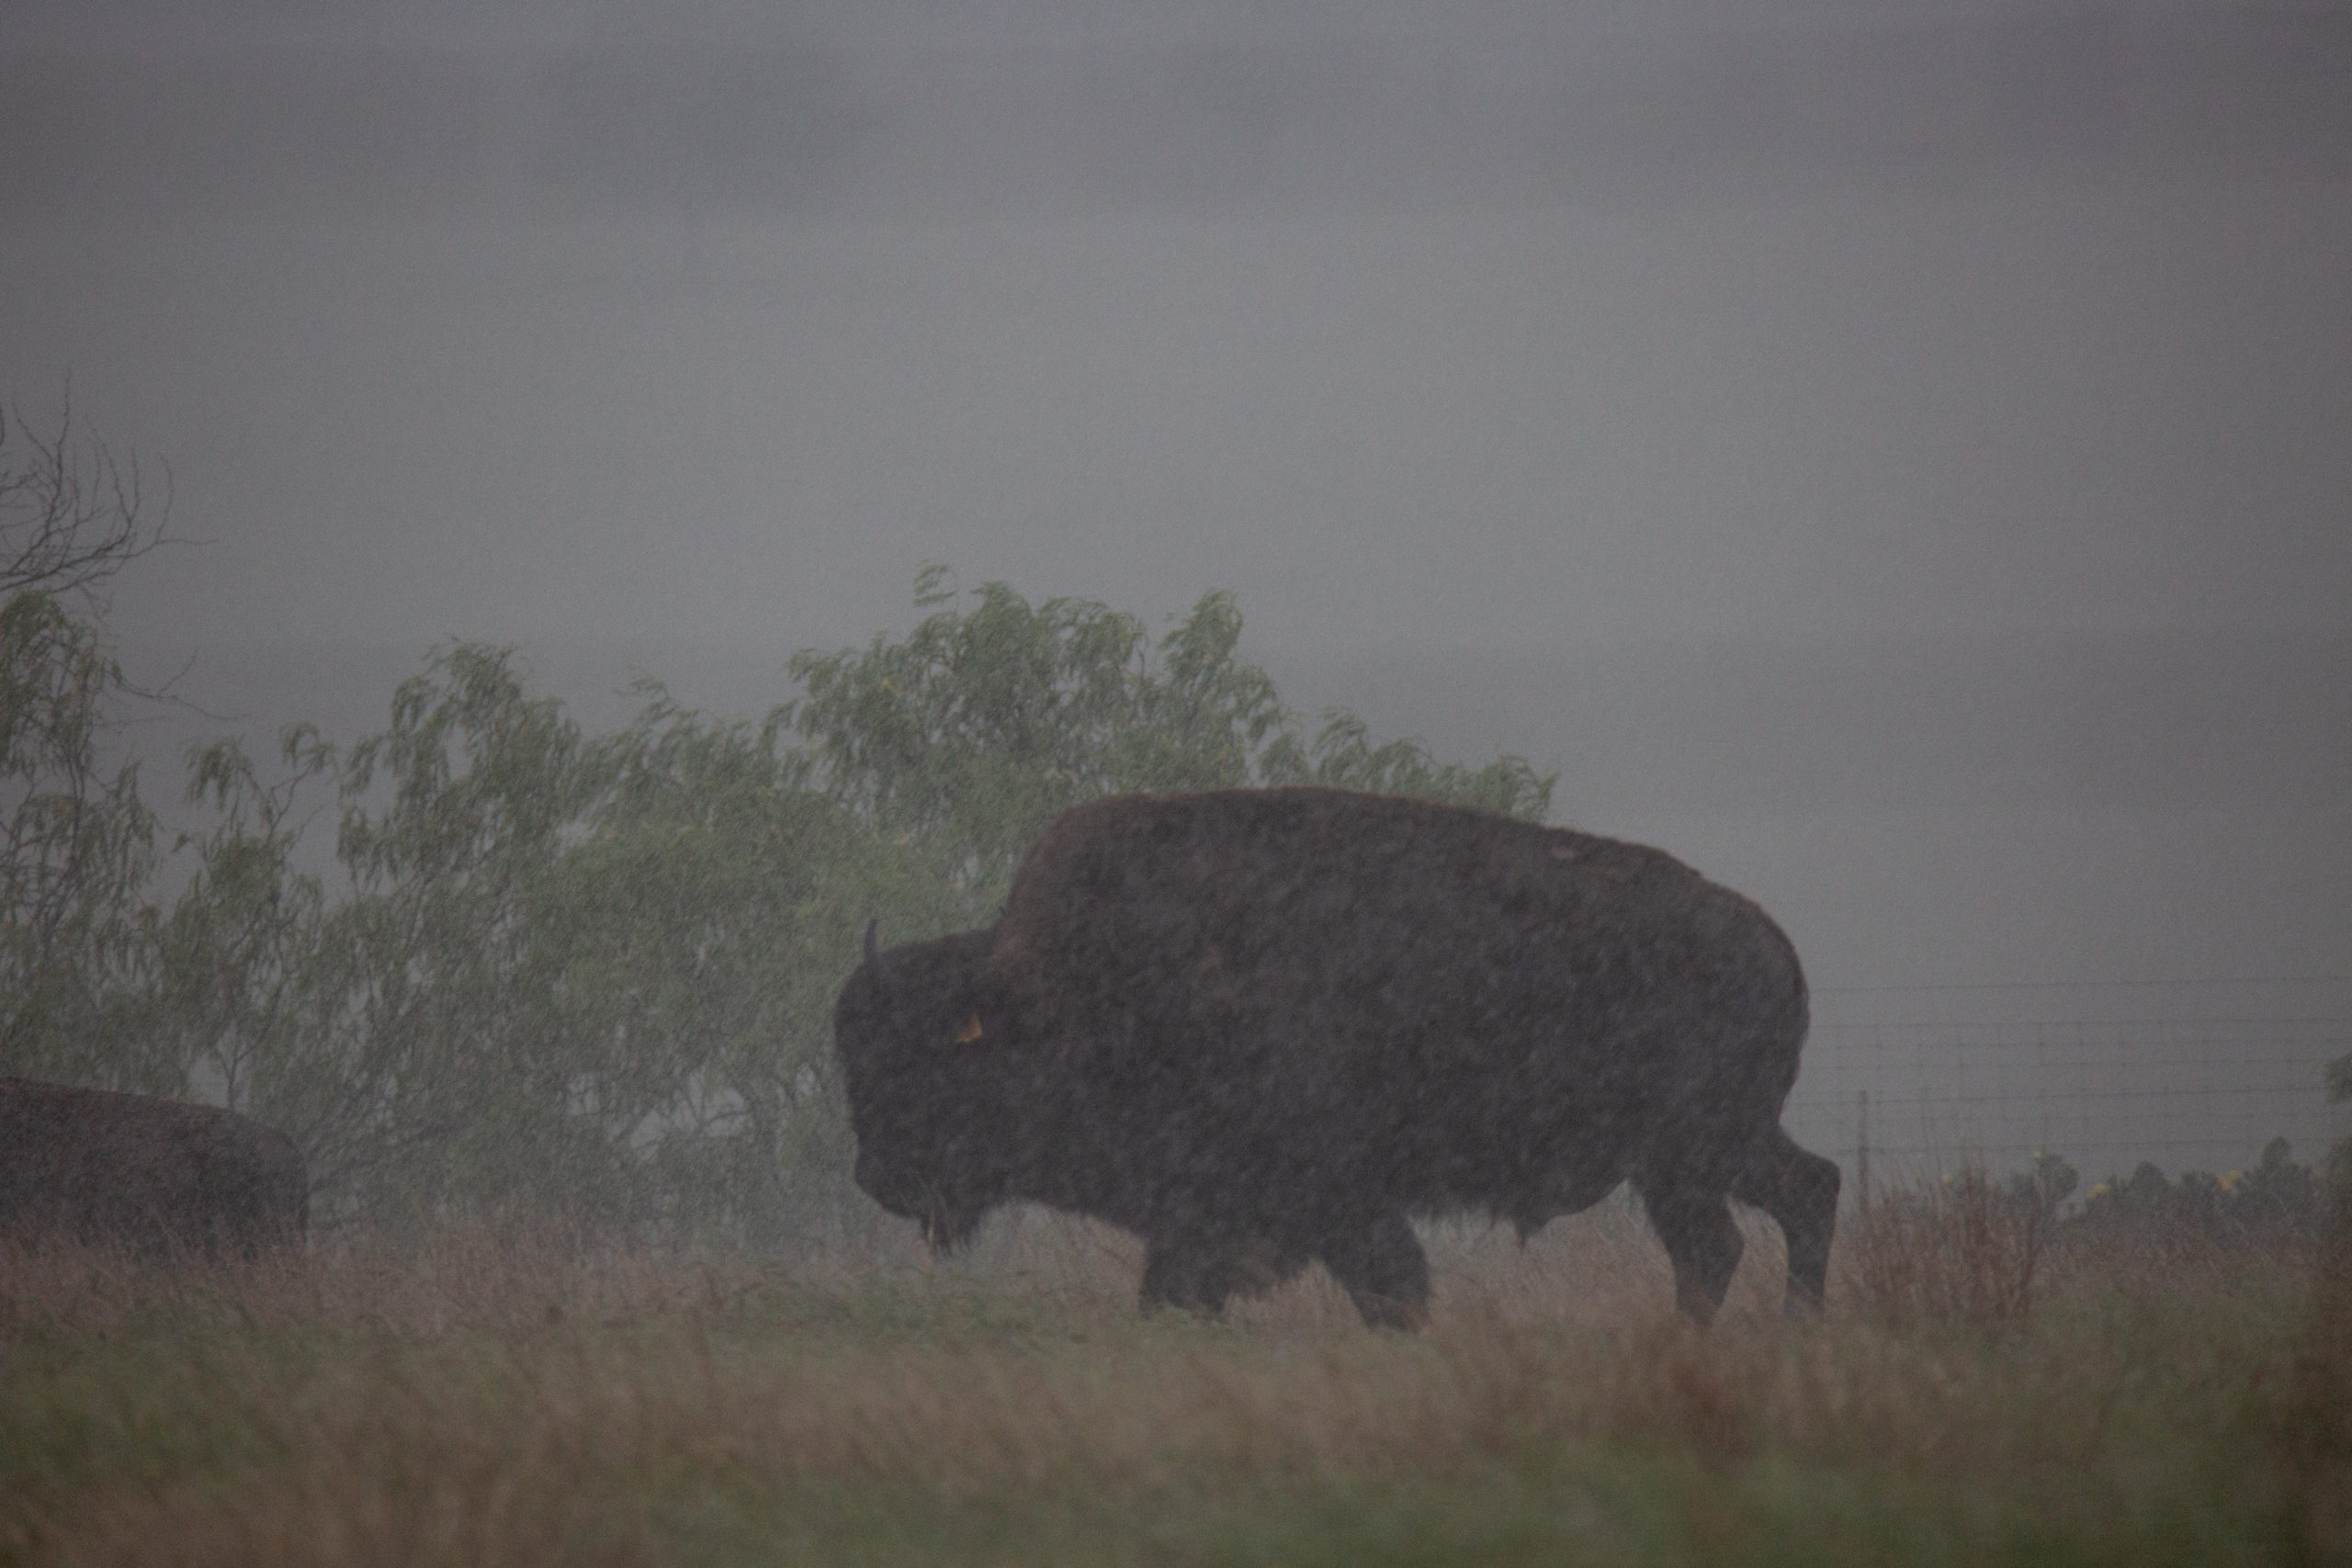 A bison walks through the rain at the Texas Tribal Buffalo Project in Waelder. The project hosts nine bison and recently welcomed the arrival of four calves.